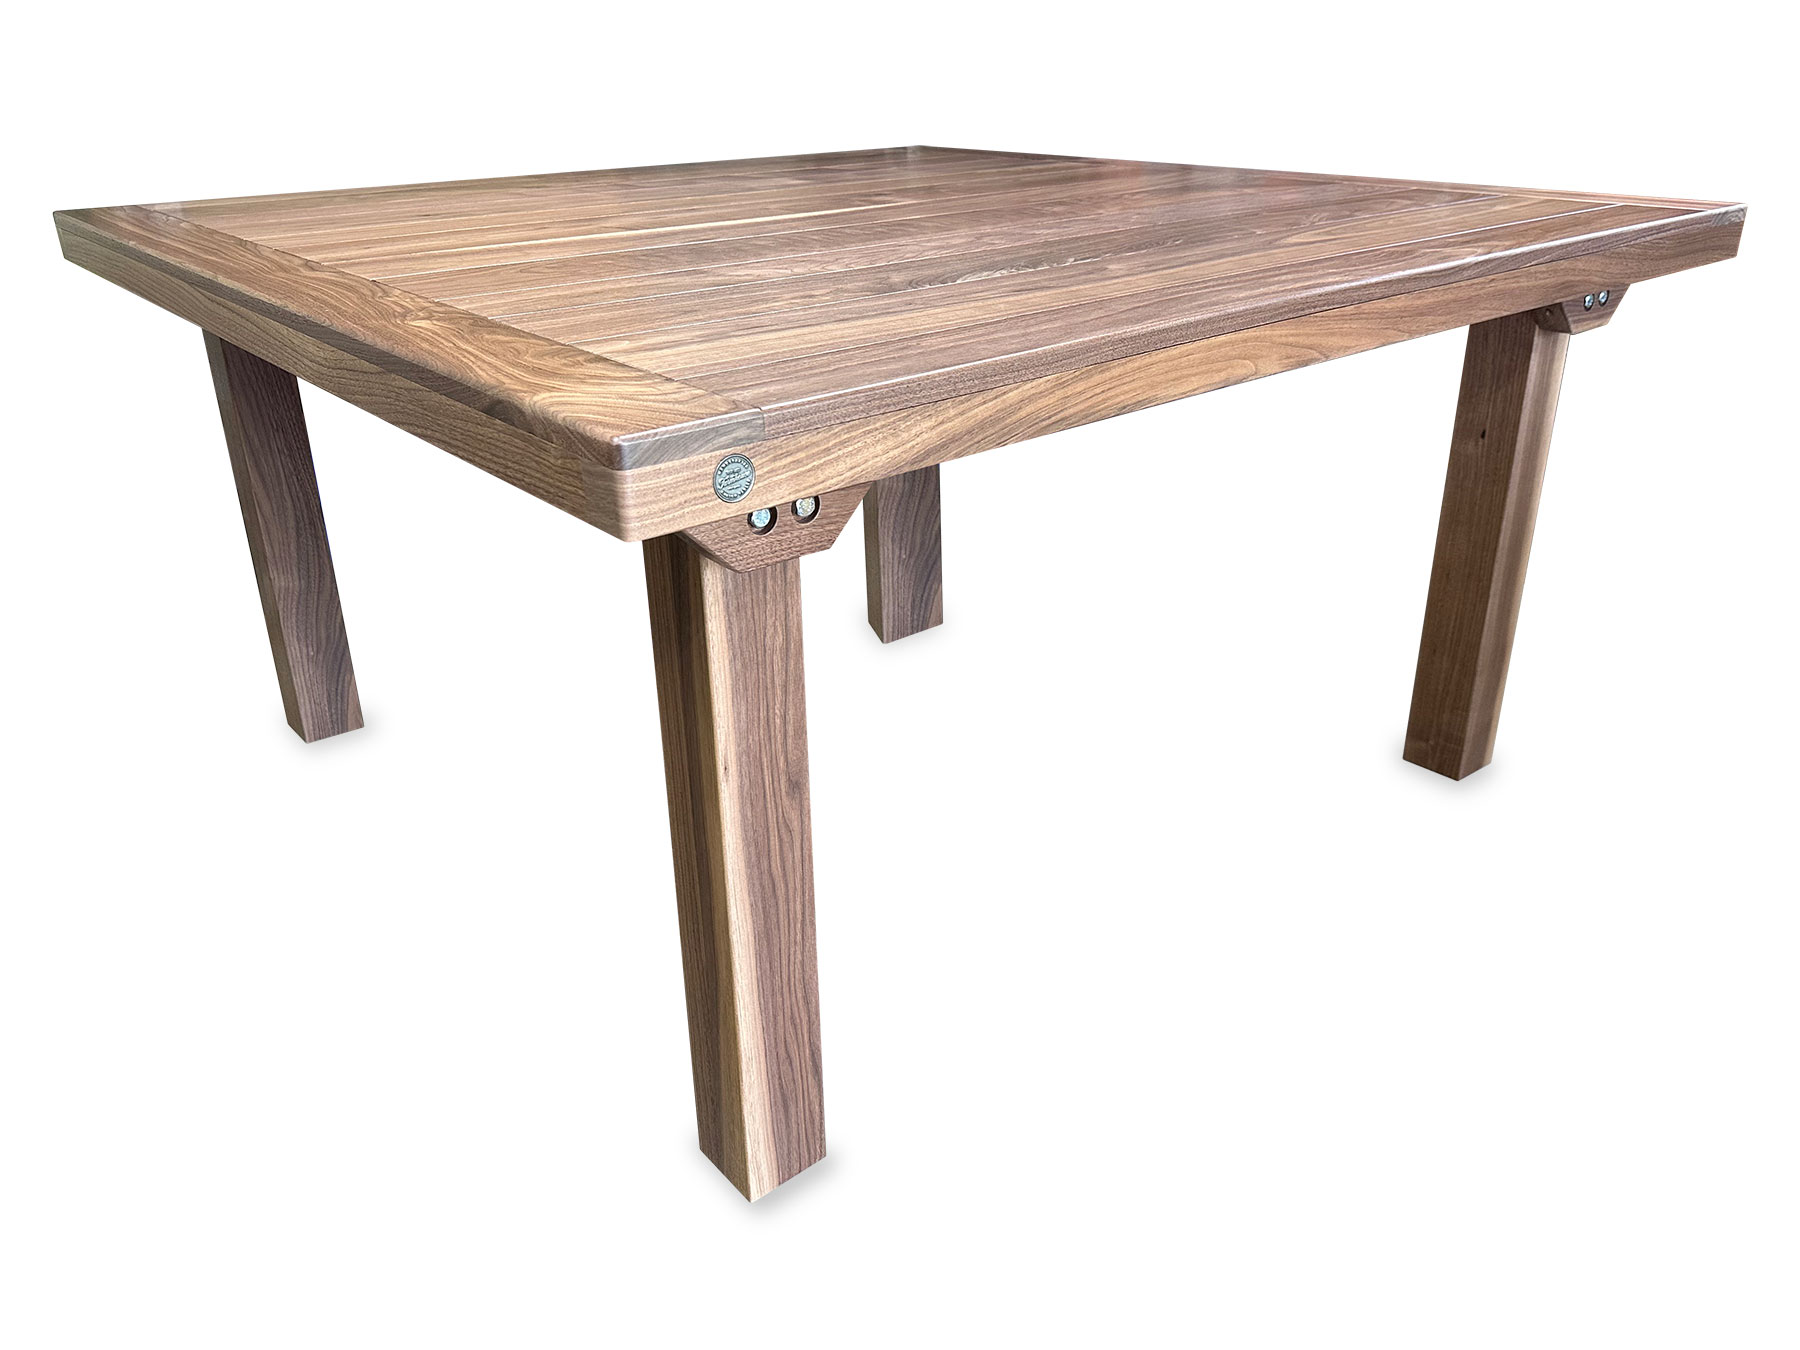 the gemma square table